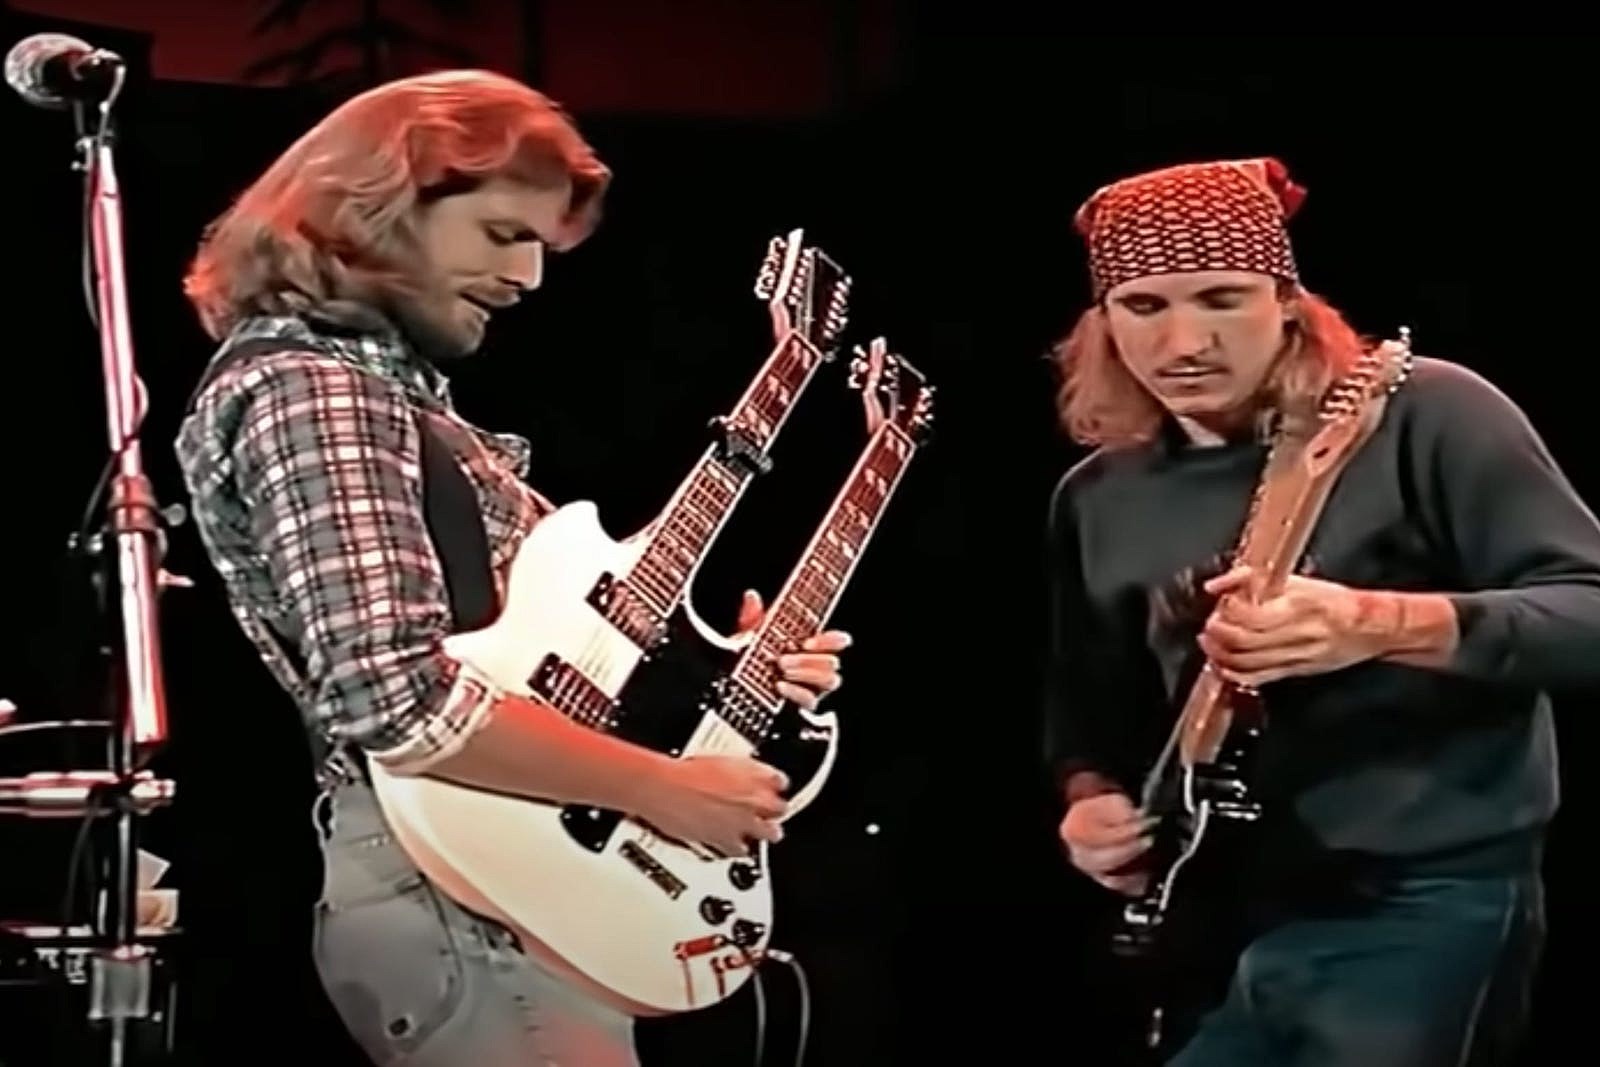 Eagles' 'Hotel California': 15 Facts You Might Not Know